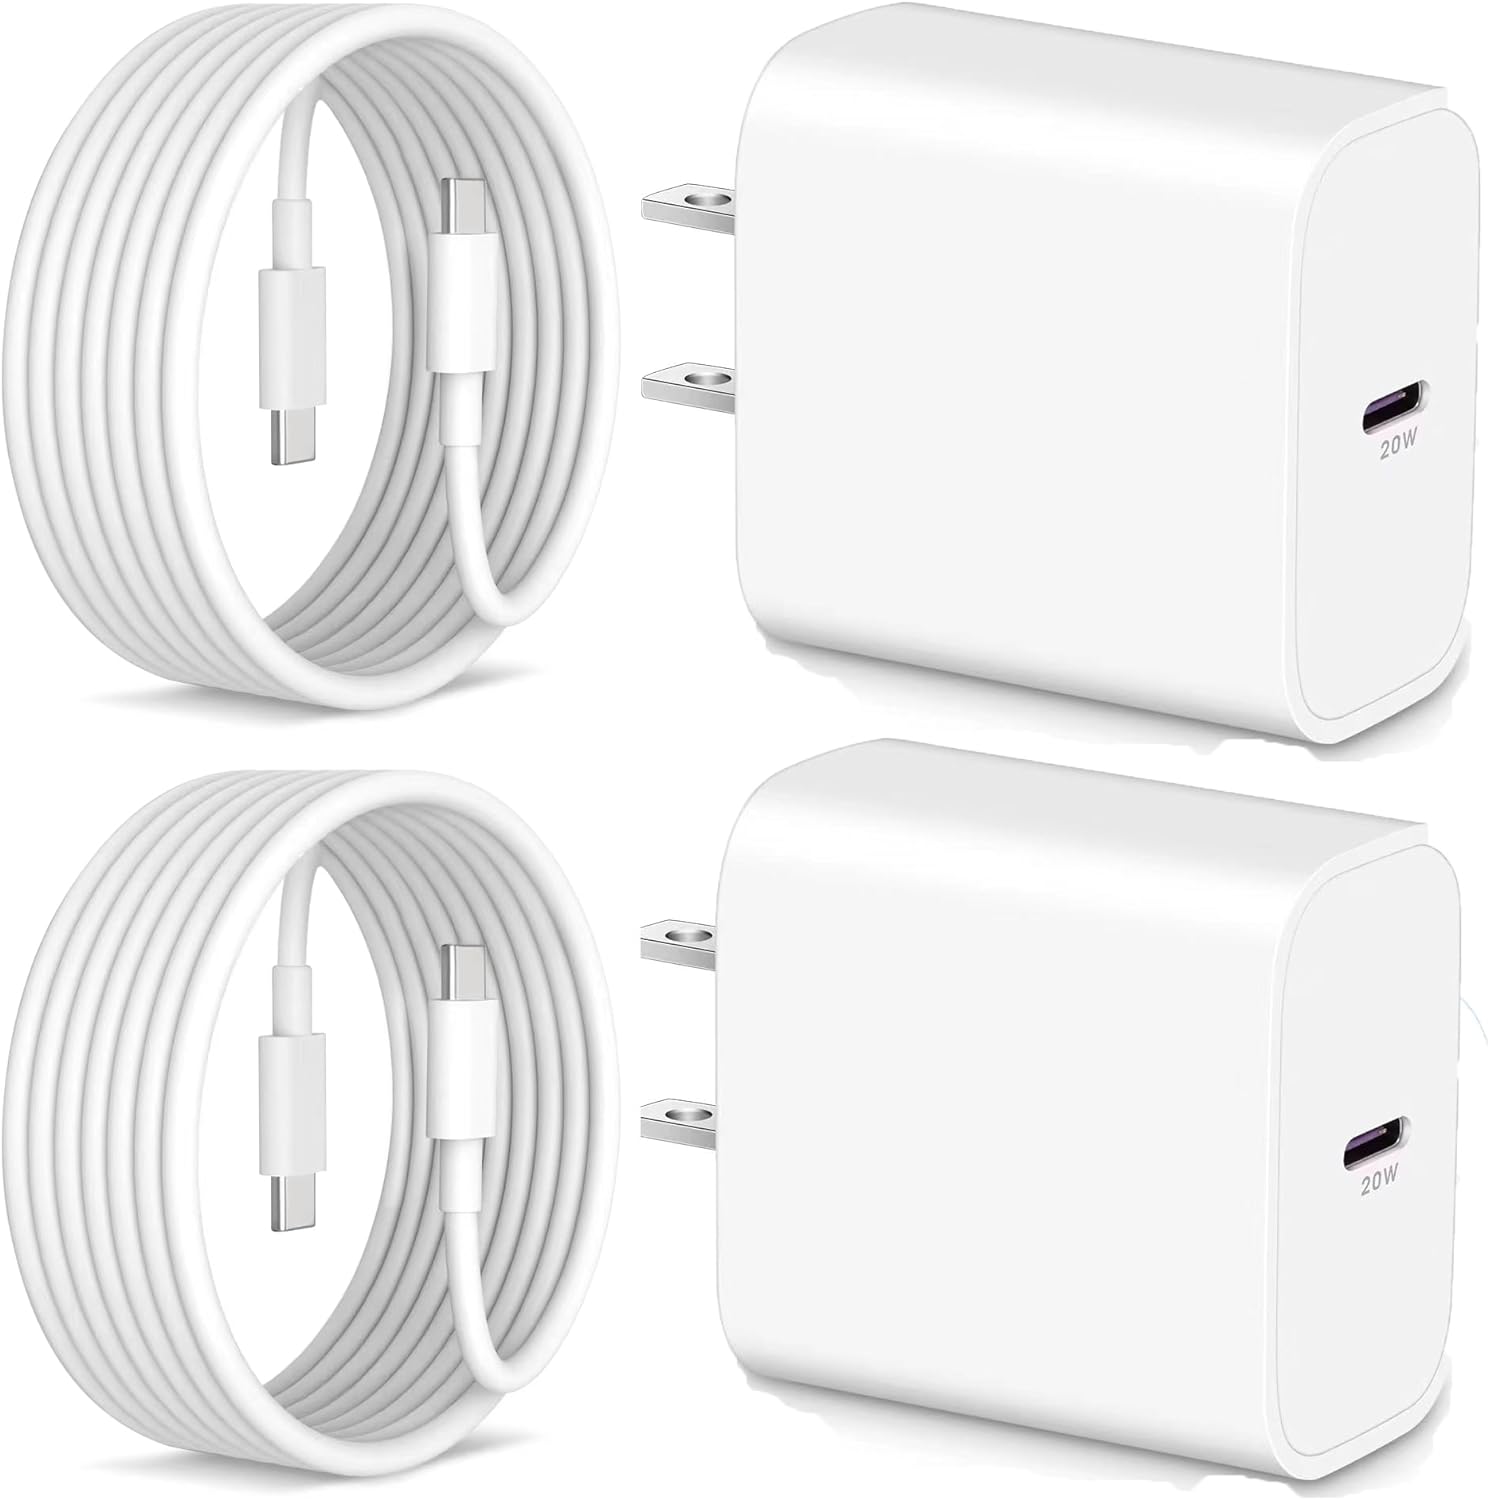 iPhone 15 Charger USB C, 2-Pack 20W Fast Wall Charger Block with 60W/3A 6FT USB C to USB C Charger Cable for iPhone 15/15 Plus/15 Pro/15 Pro Max, iPad Pro 12.9/11 inch, iPad Air 5/4th, iPad 10/Mini 6